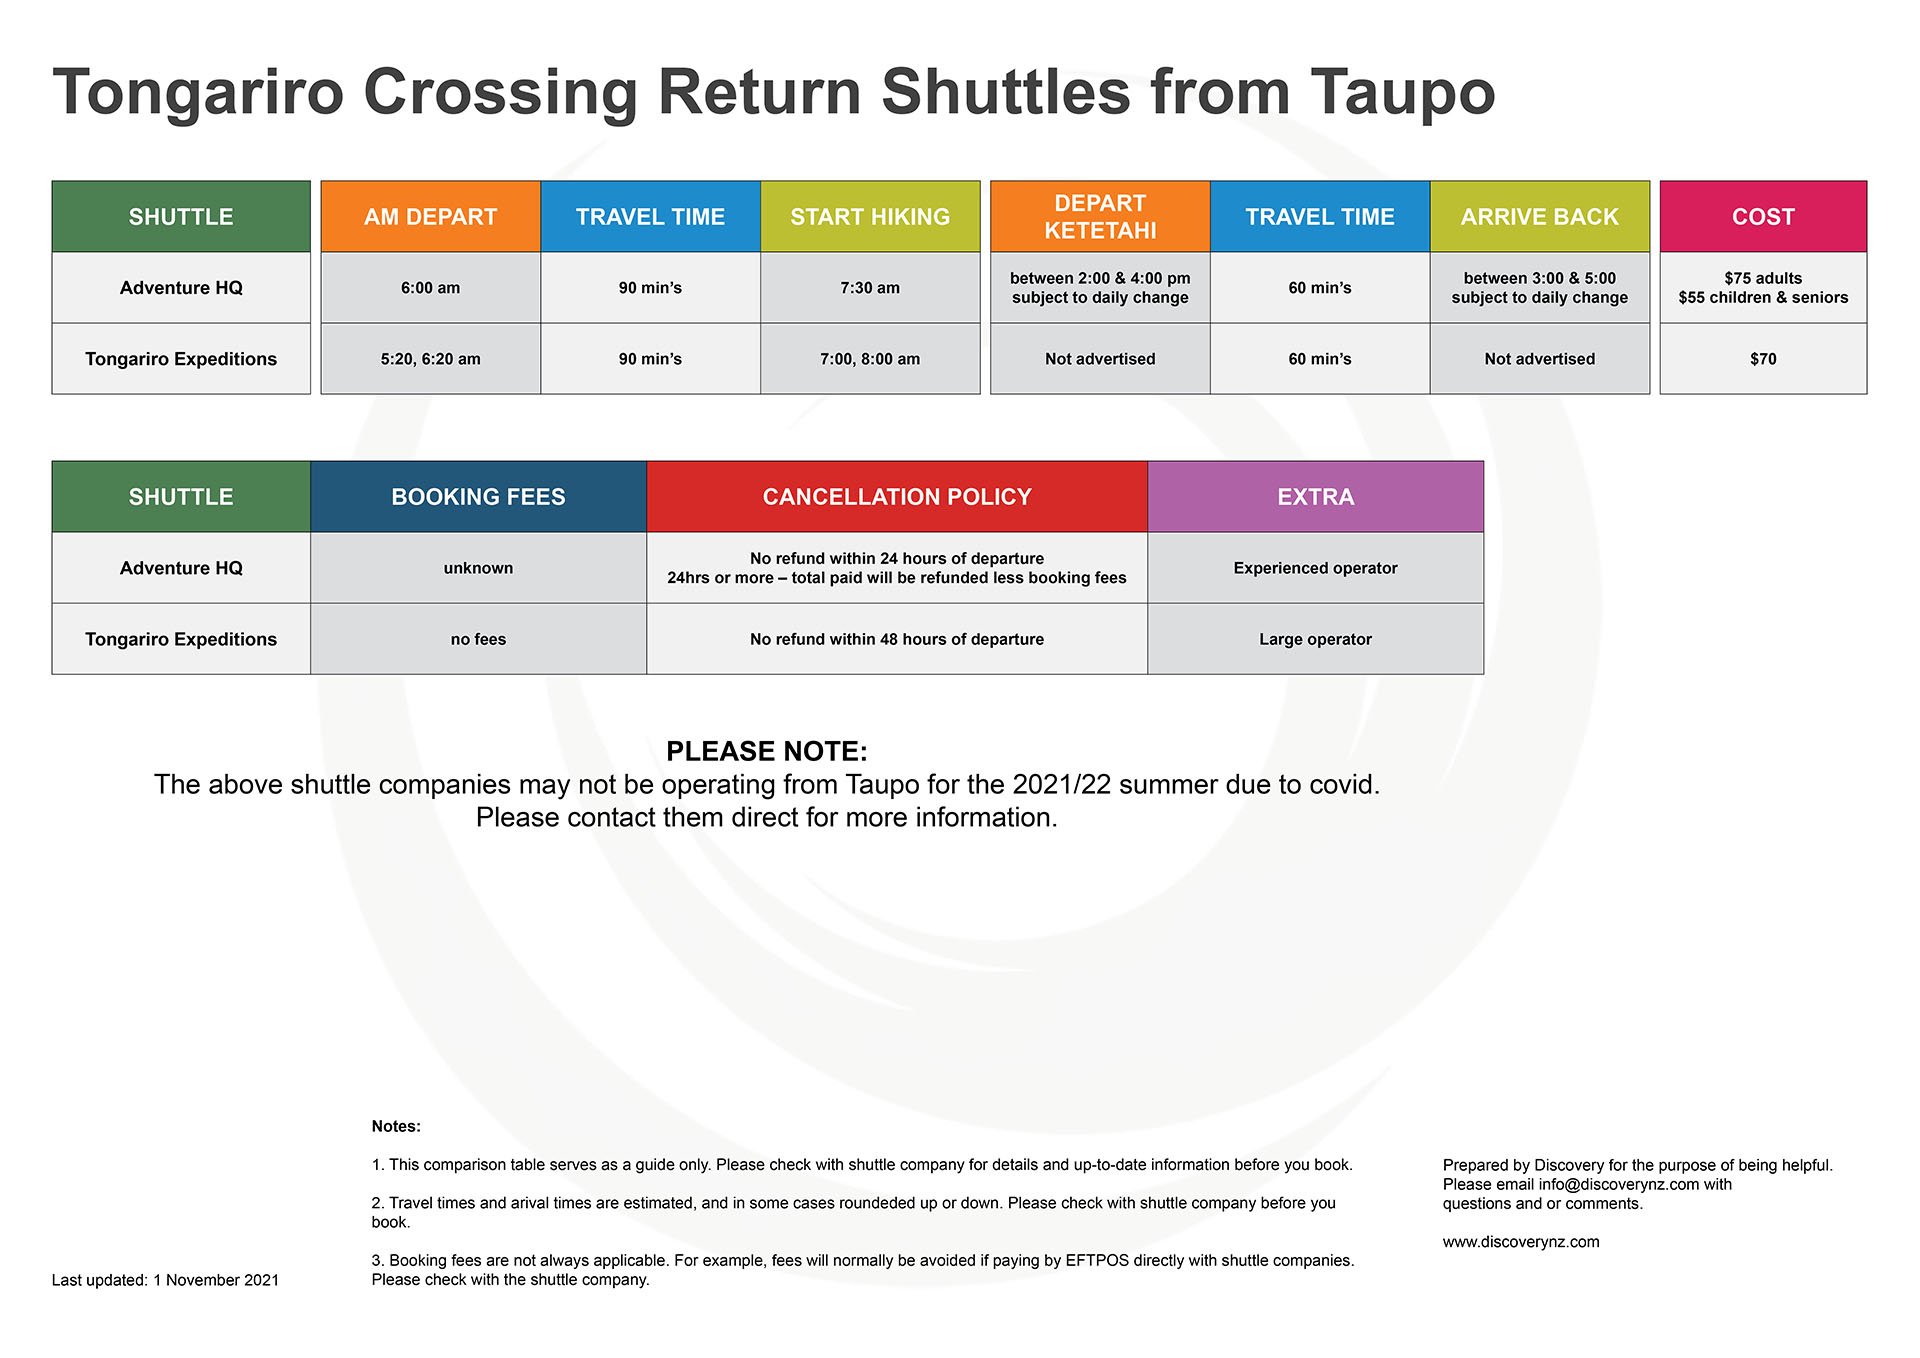 Tongariro Crossing Comparison table. Return shuttles from Taupo